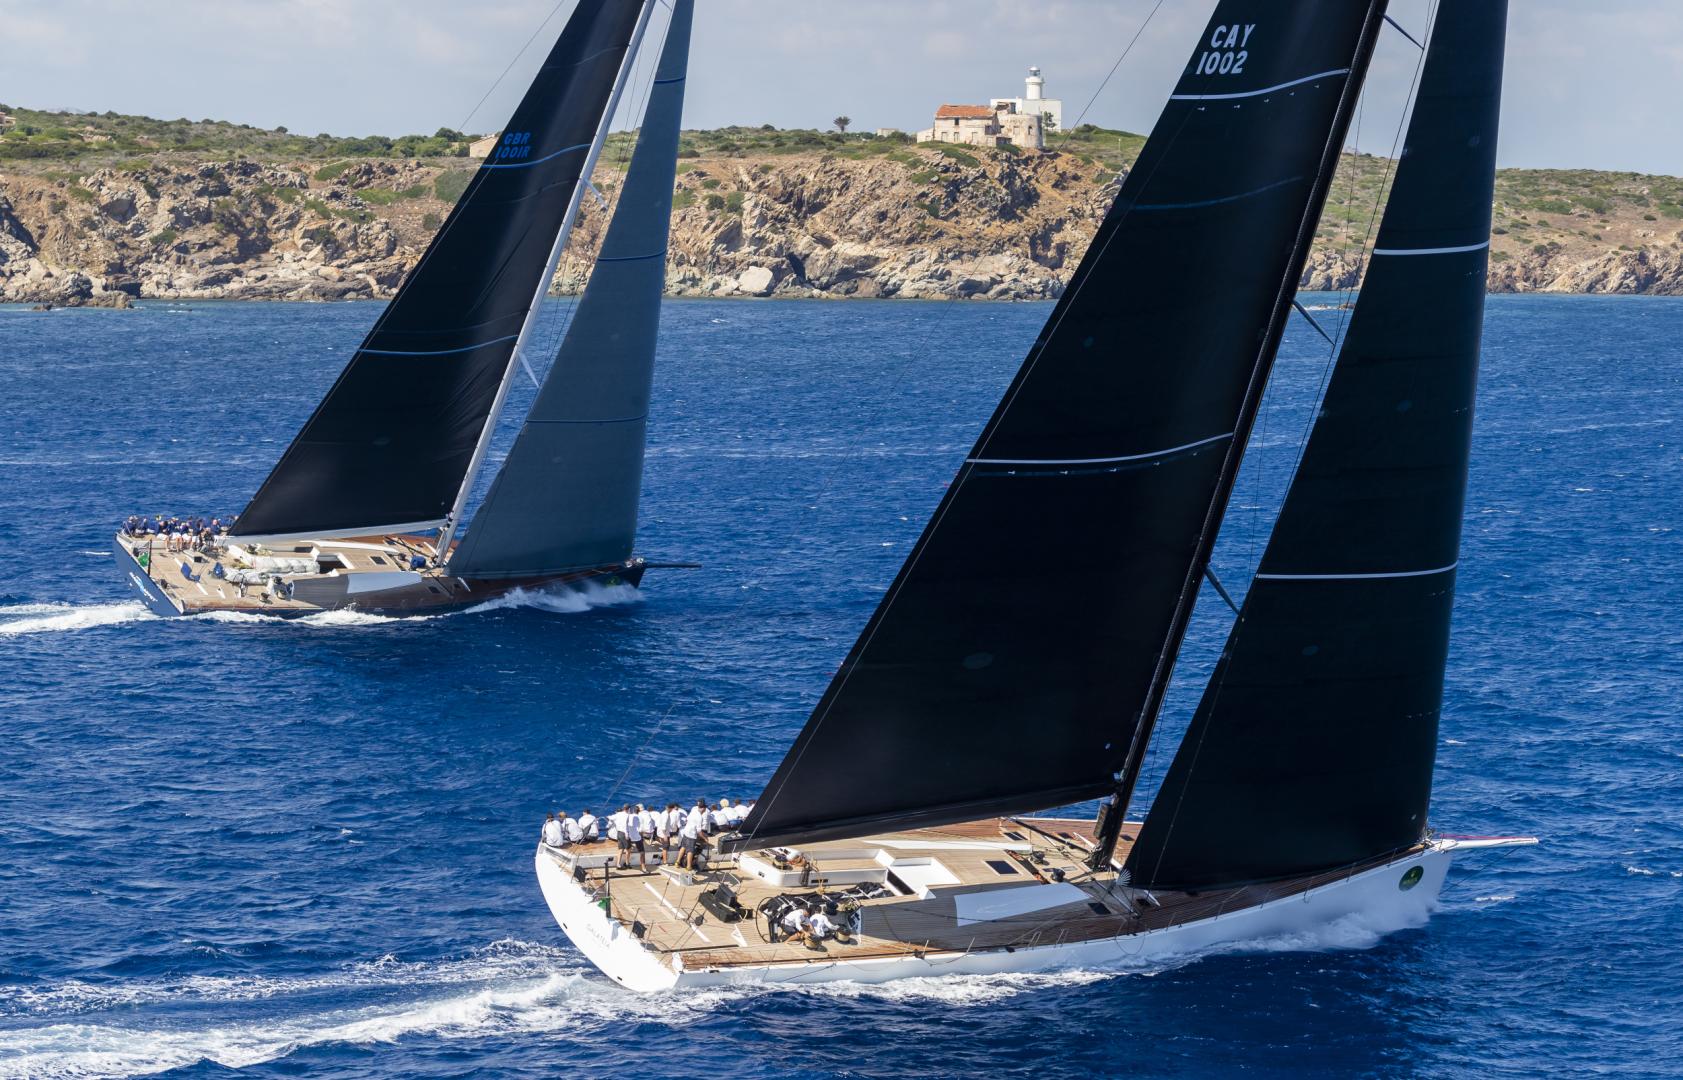 Largest and fastest gather for 30th Maxi Yacht Rolex Cup